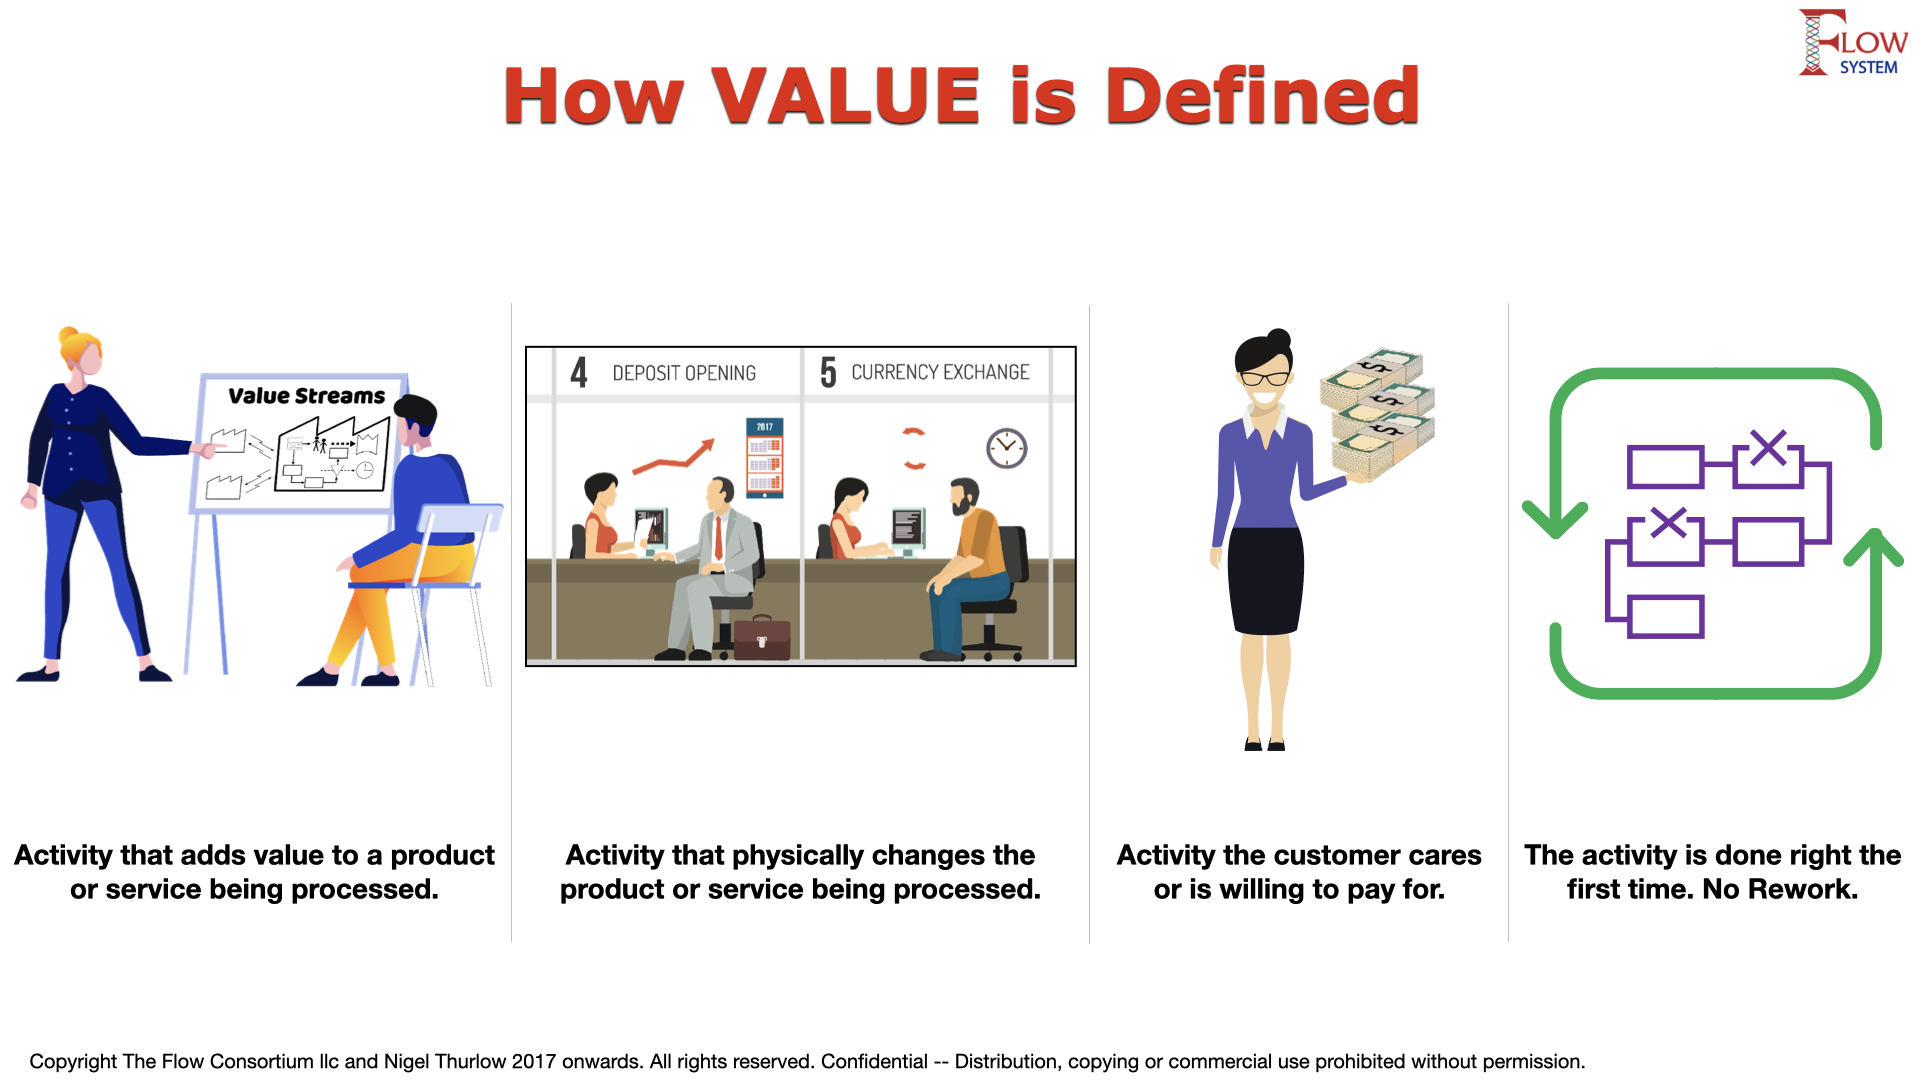 Image showing how value is defined